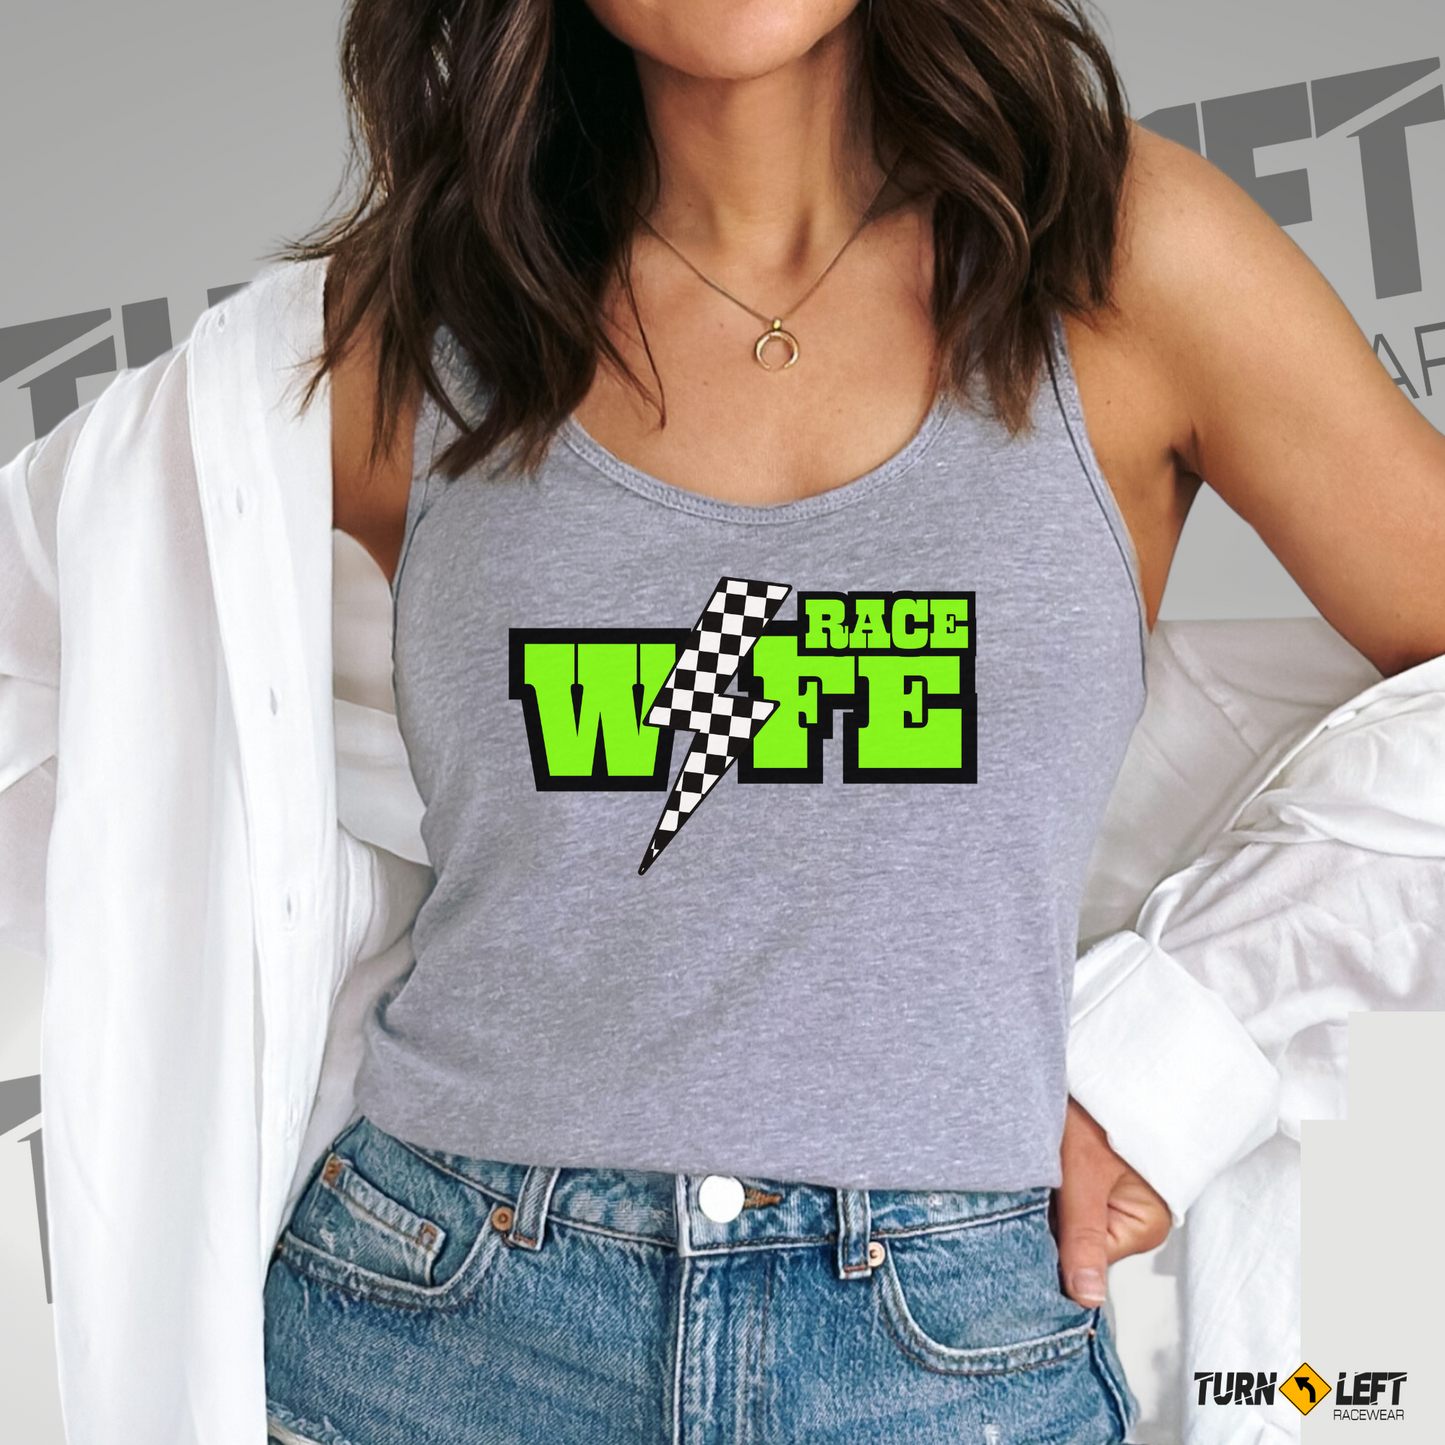 Dirt Track Racing Race Wife Tank Tops. Racer Wife Gifts. 